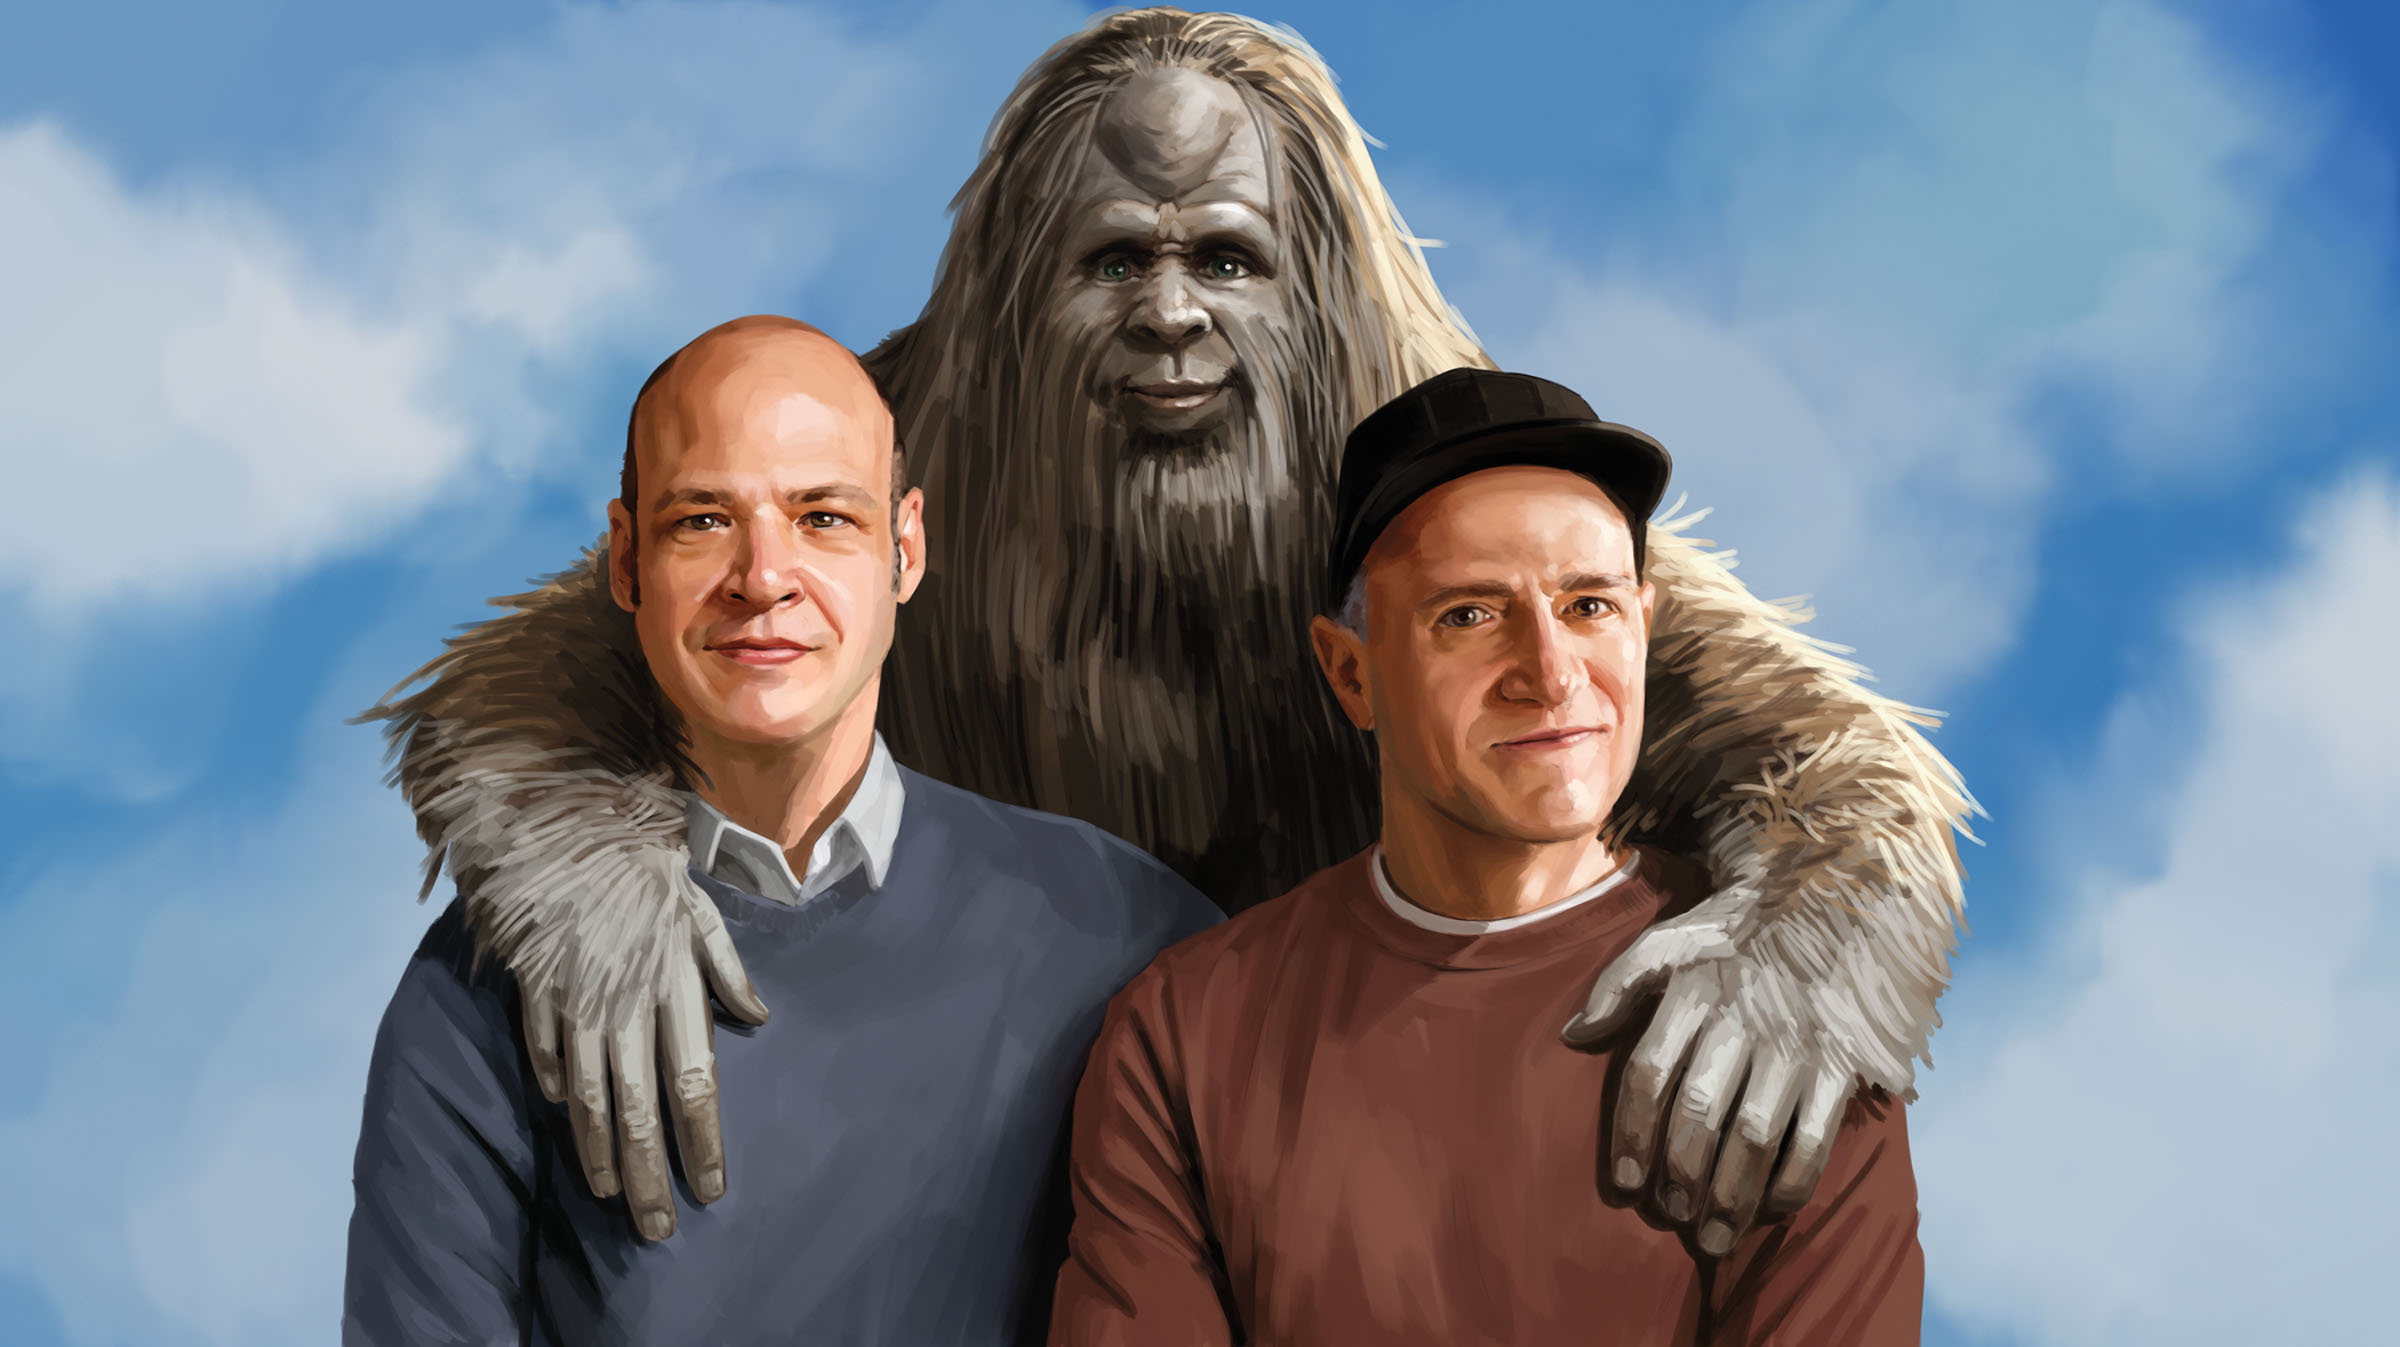 An illustration of bigfoot placing his arms around the shoulders of two men